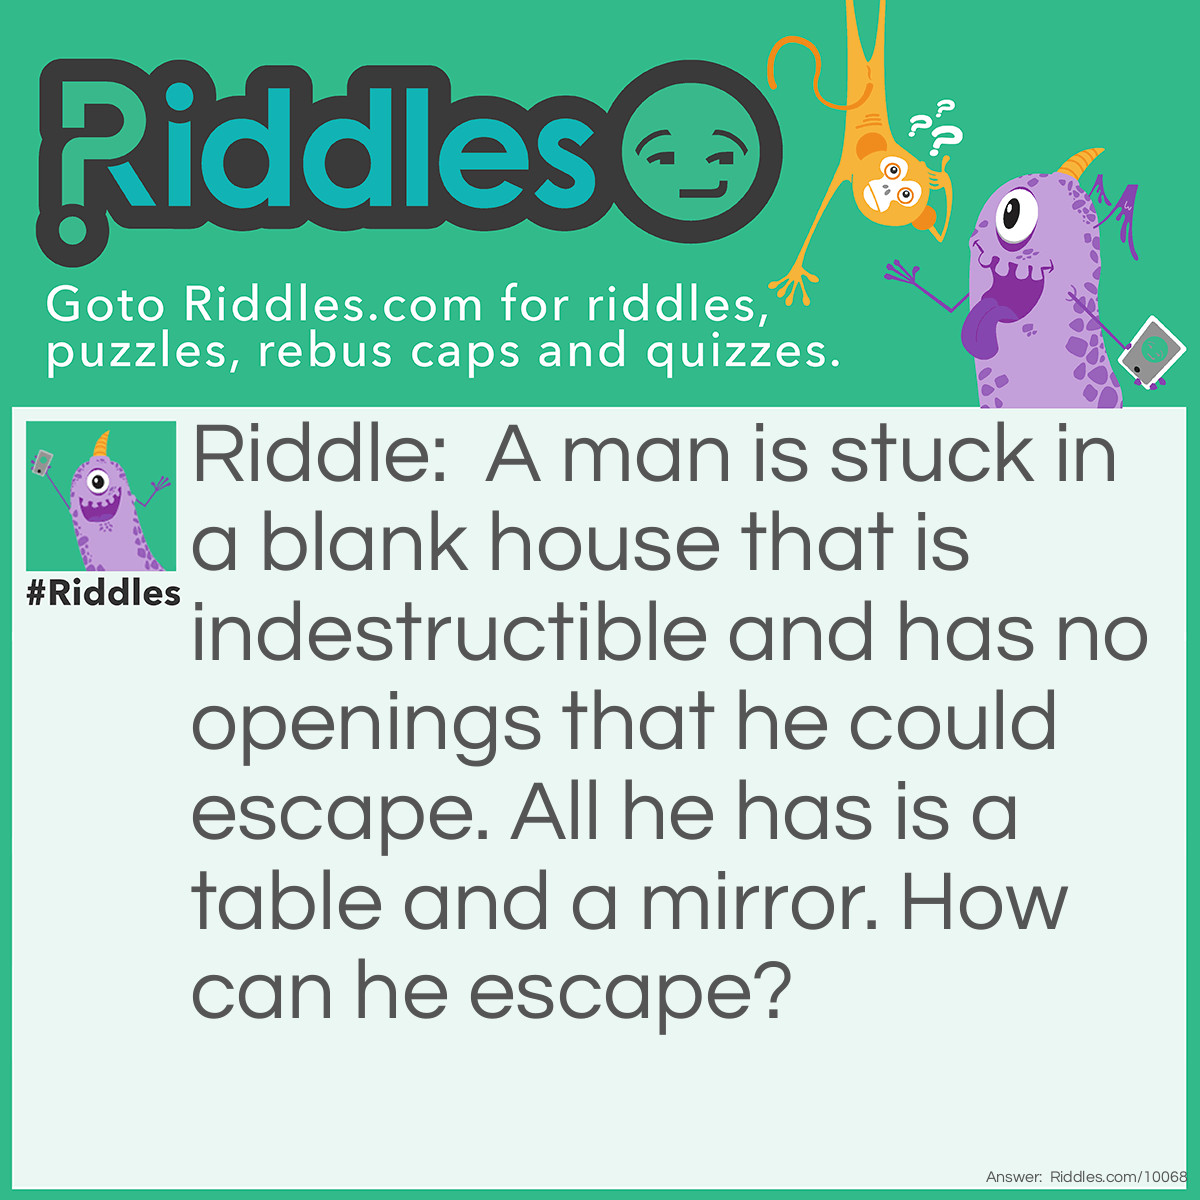 Riddle: A man is stuck in a blank house that is indestructible and has no openings that he could escape. All he has is a table and a mirror. How can he escape? Answer: He looks into the mirror. He sees what he sees, he saw what he saw. He takes the saw out, and he cuts the table in half. Two halves make a whole, and he jumps into the hole and gets out.